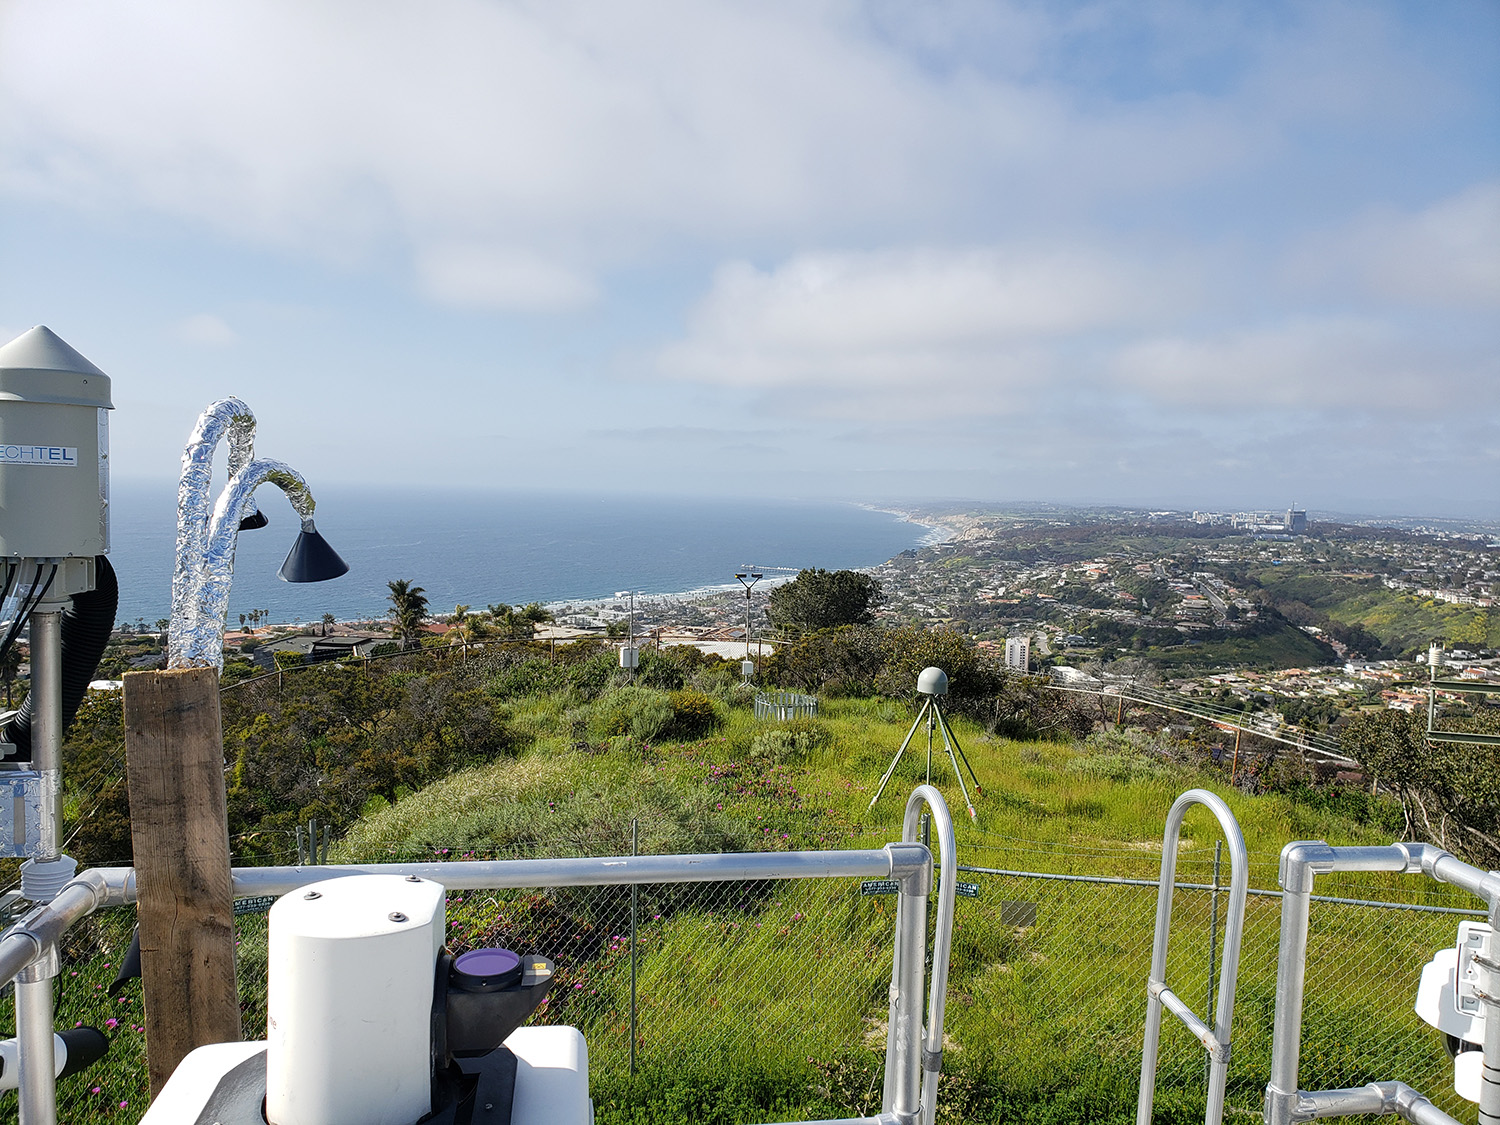 A view of the Pacific Ocean coastline in La Jolla, California, taken from where aerosol instruments are stationed atop Mt. Soledad. EPCAPE’s oceanside site, the Scripps Memorial Pier, appears as a thin white line in the middle distance. Photo by Smith.